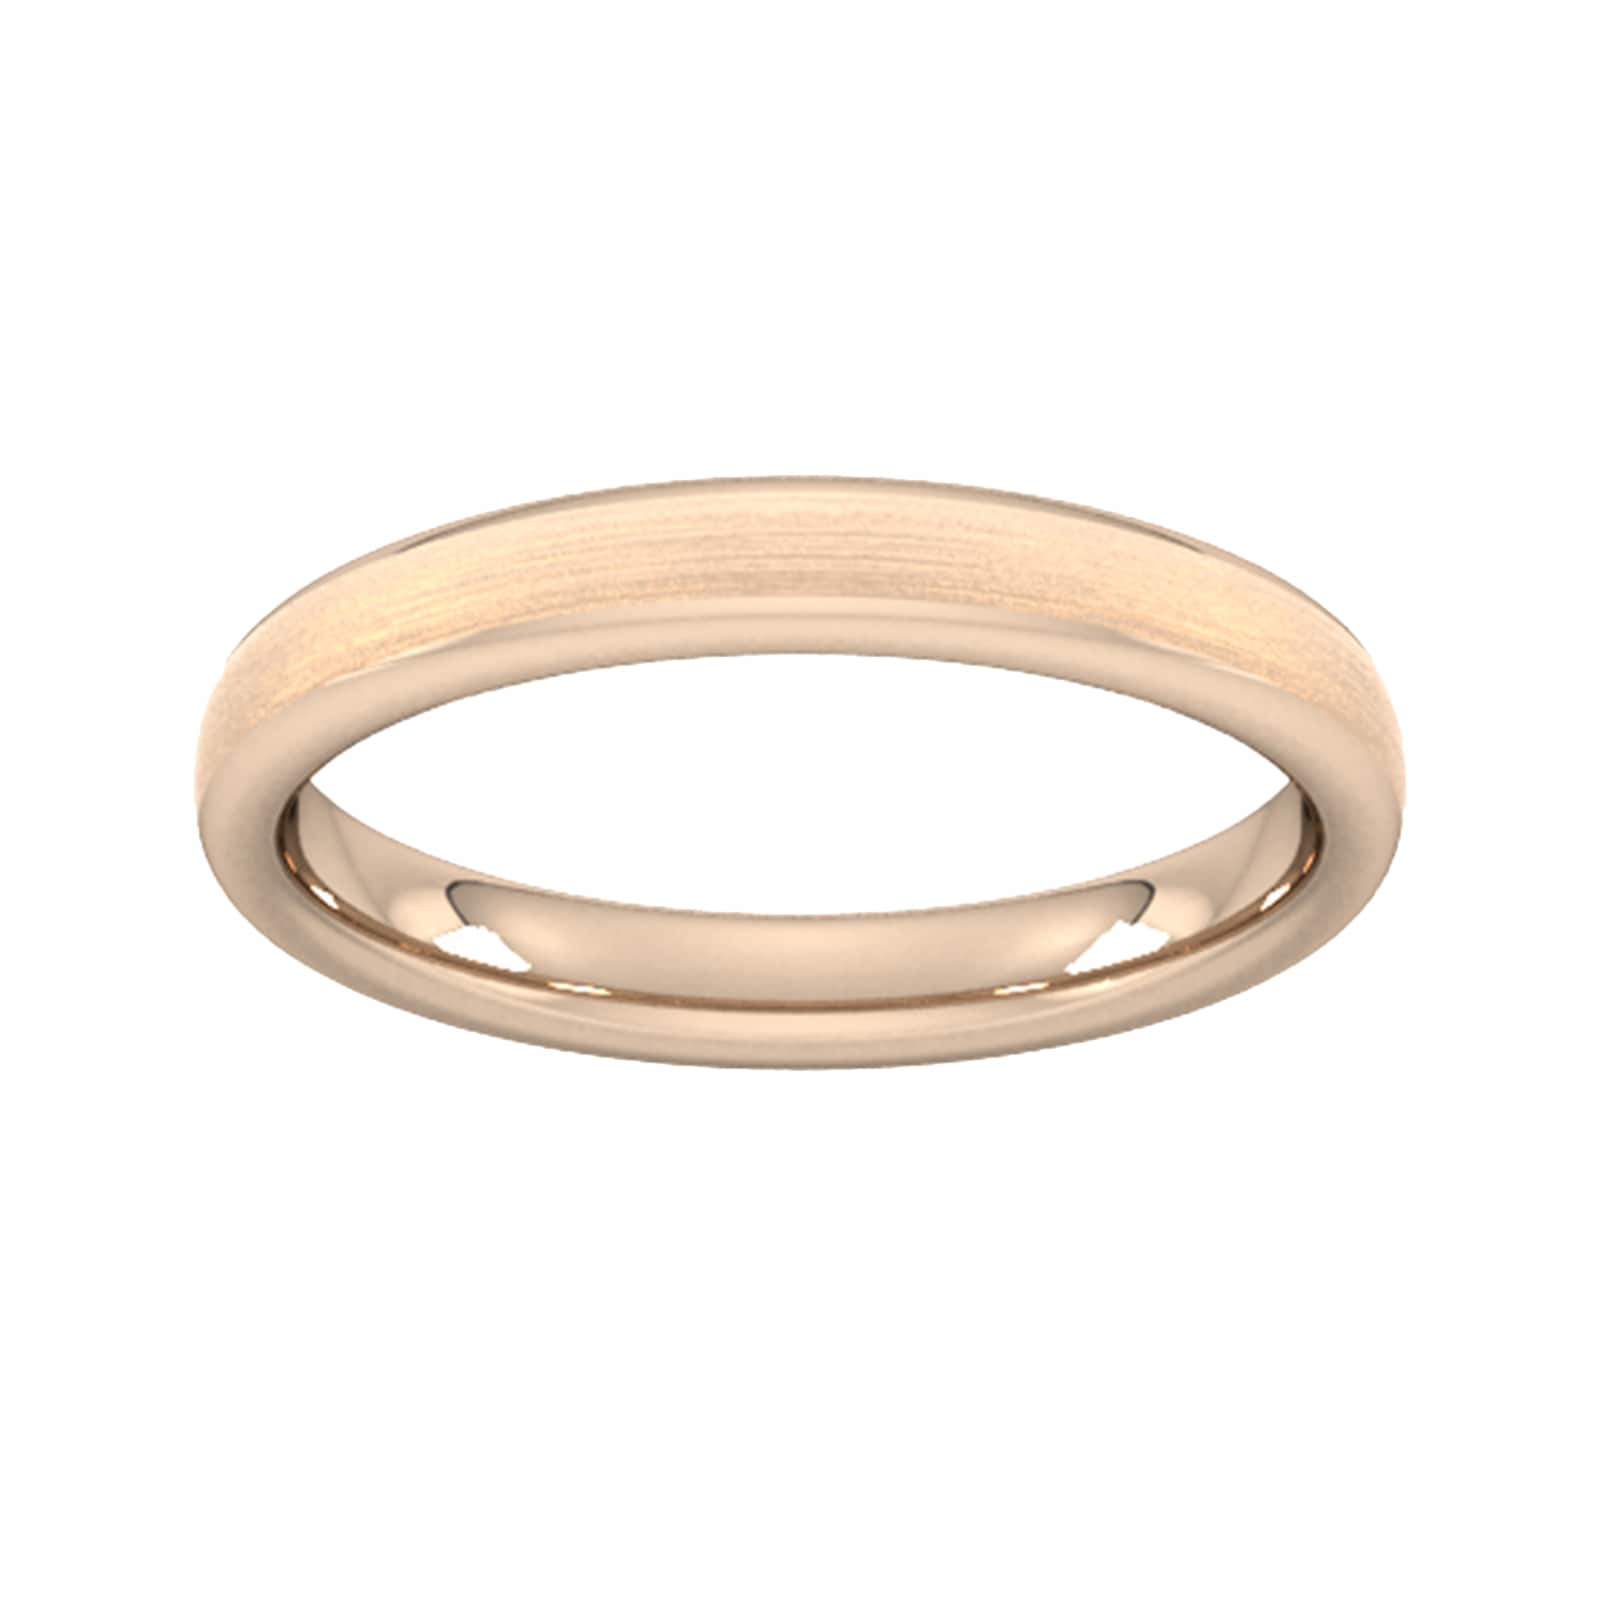 3mm D Shape Heavy Matt Finished Wedding Ring In 9 Carat Rose Gold - Ring Size S